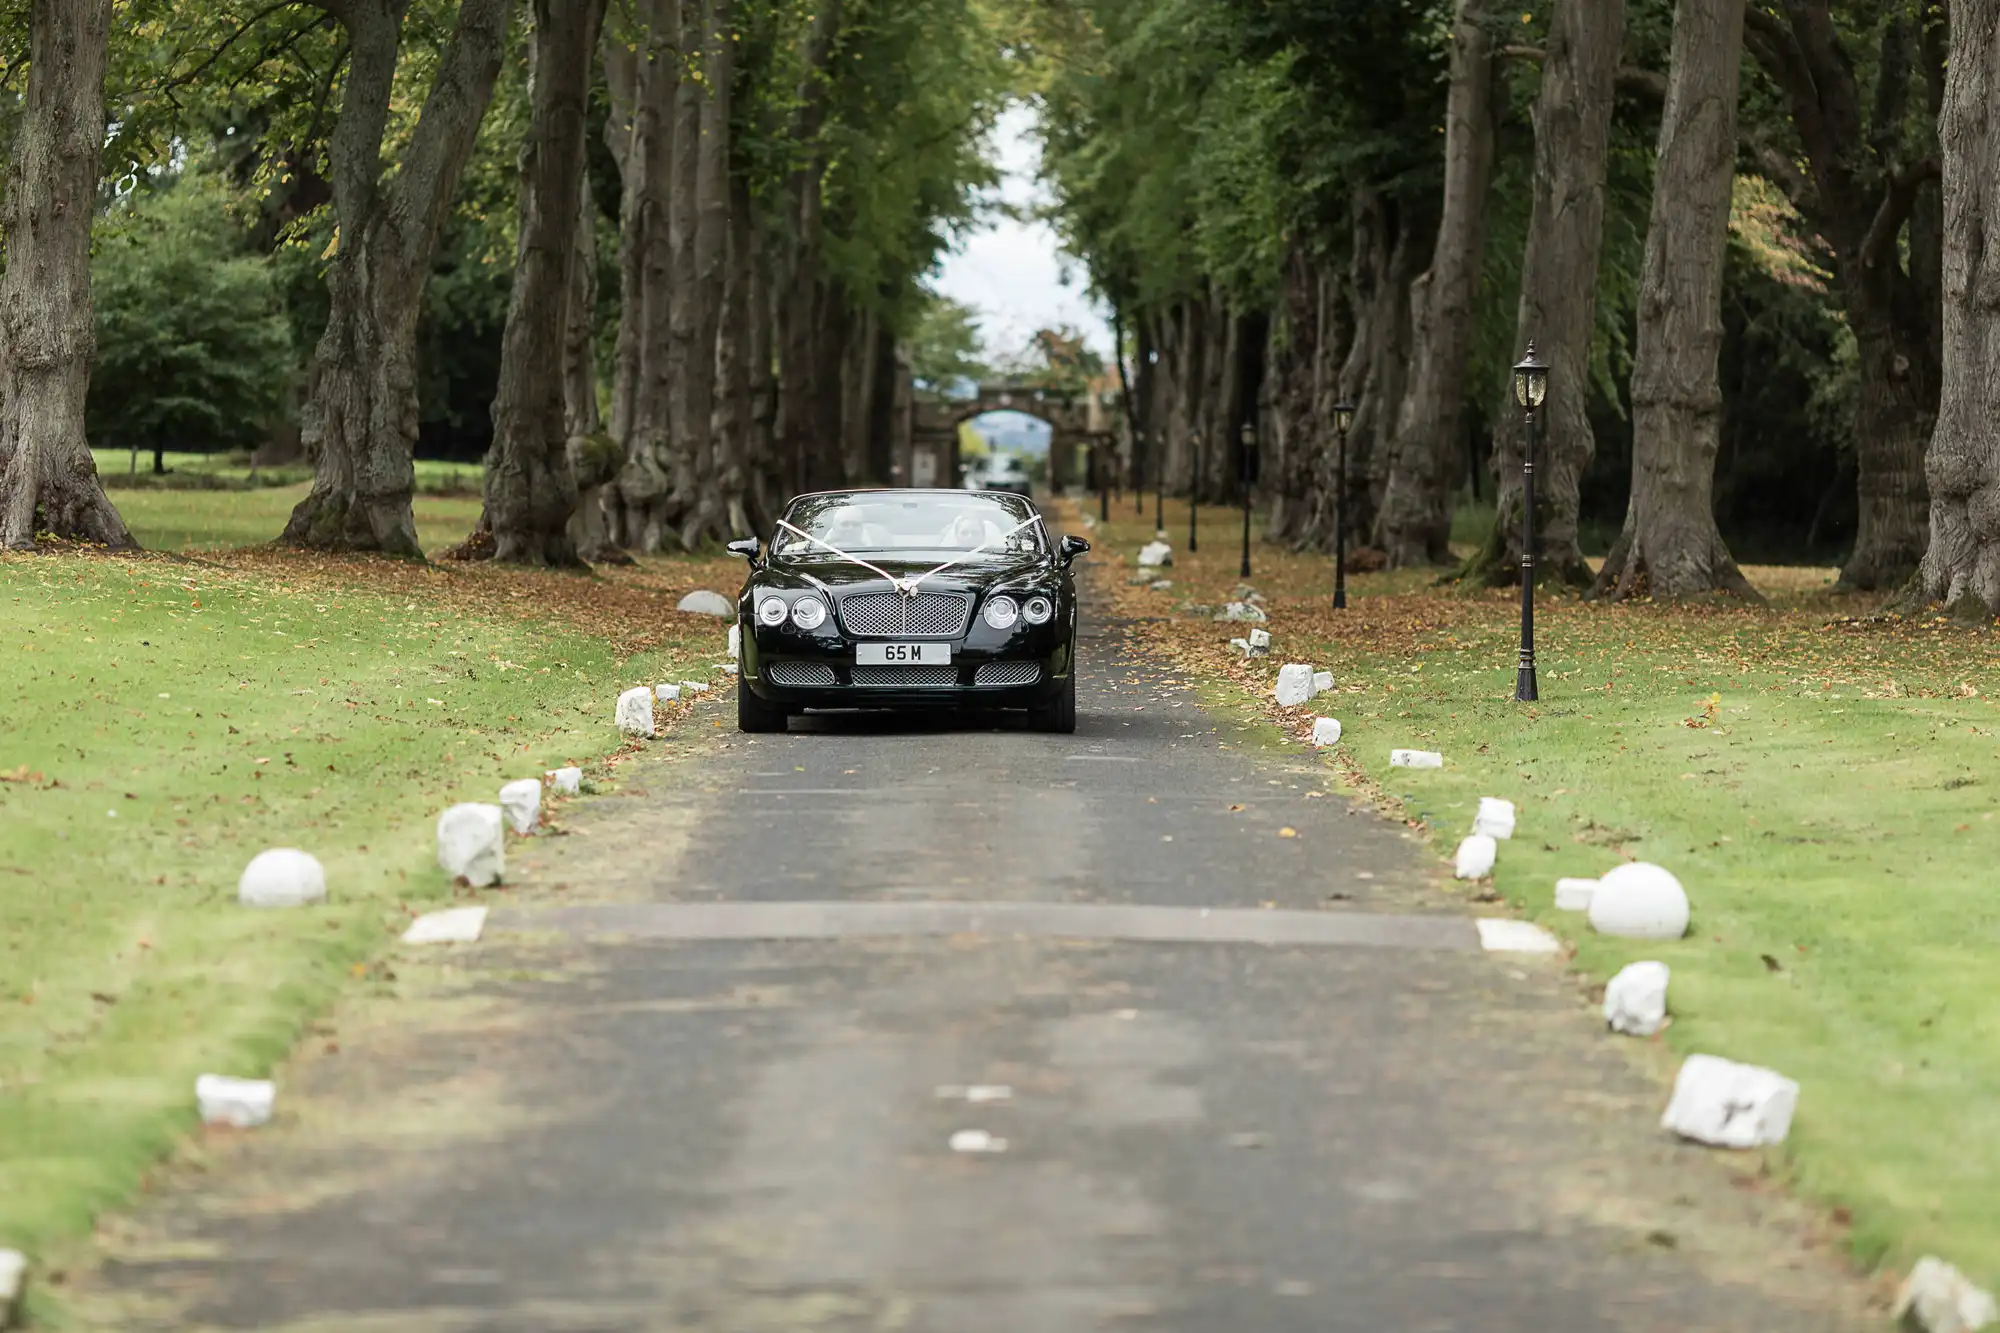 A black luxury car parked on a tree-lined path with evenly spaced trees and small white boulders on either side of the path.